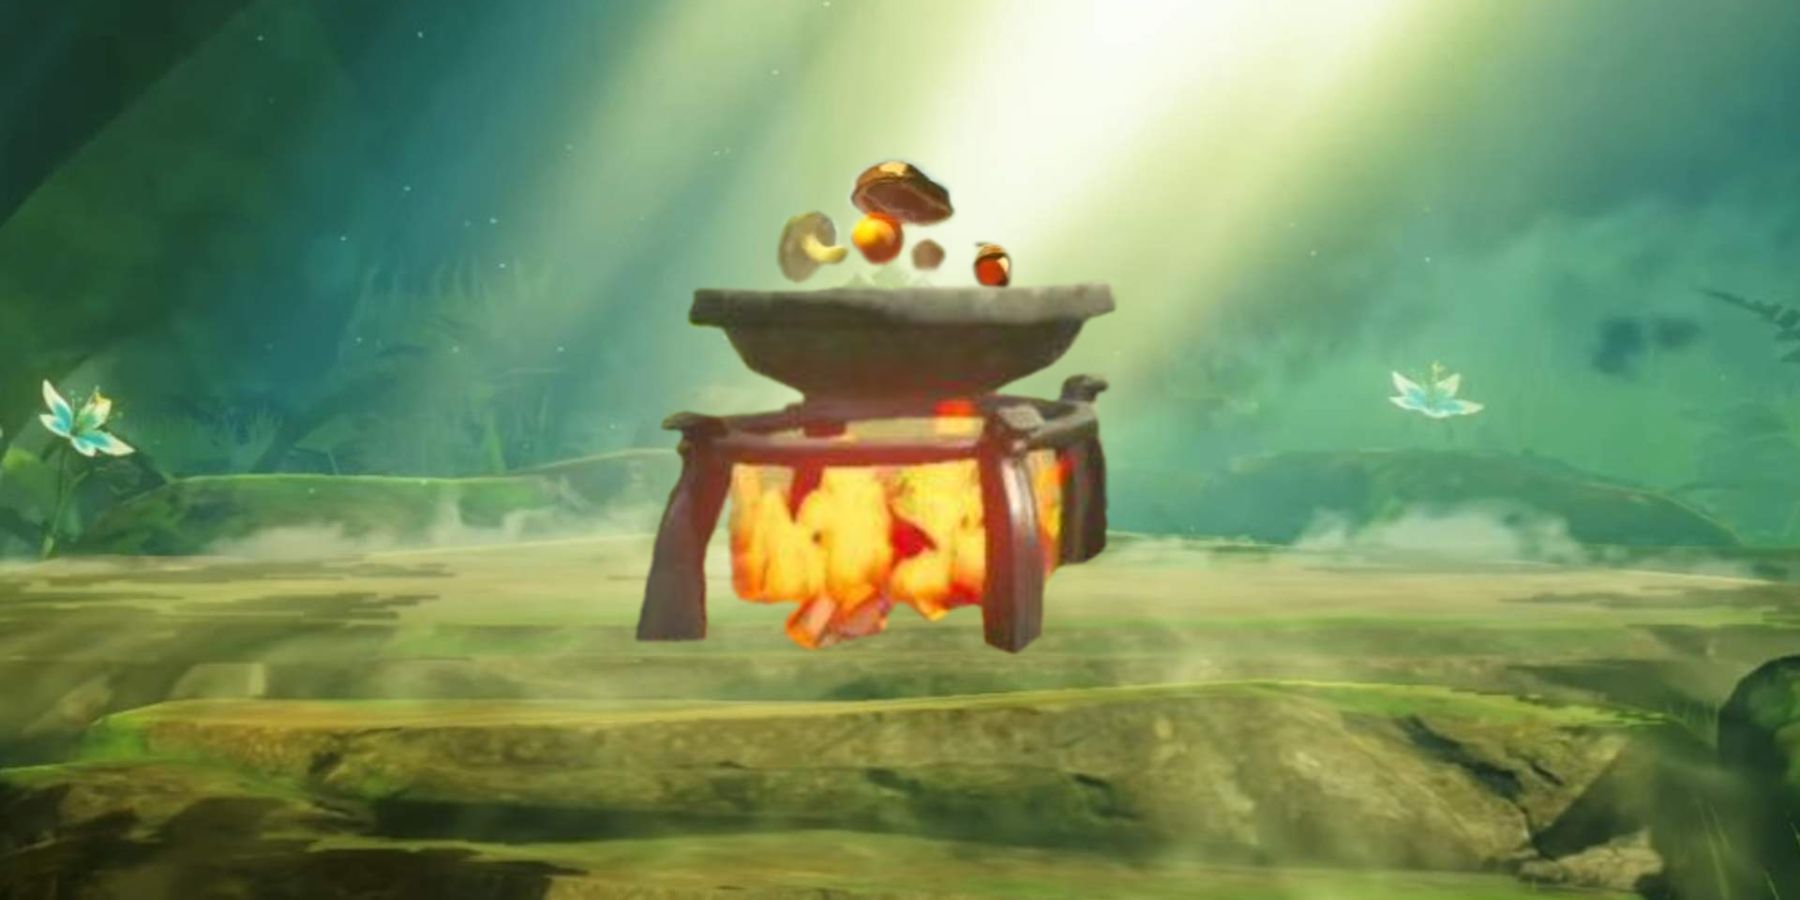 Cooking pot in Breath of The Wild